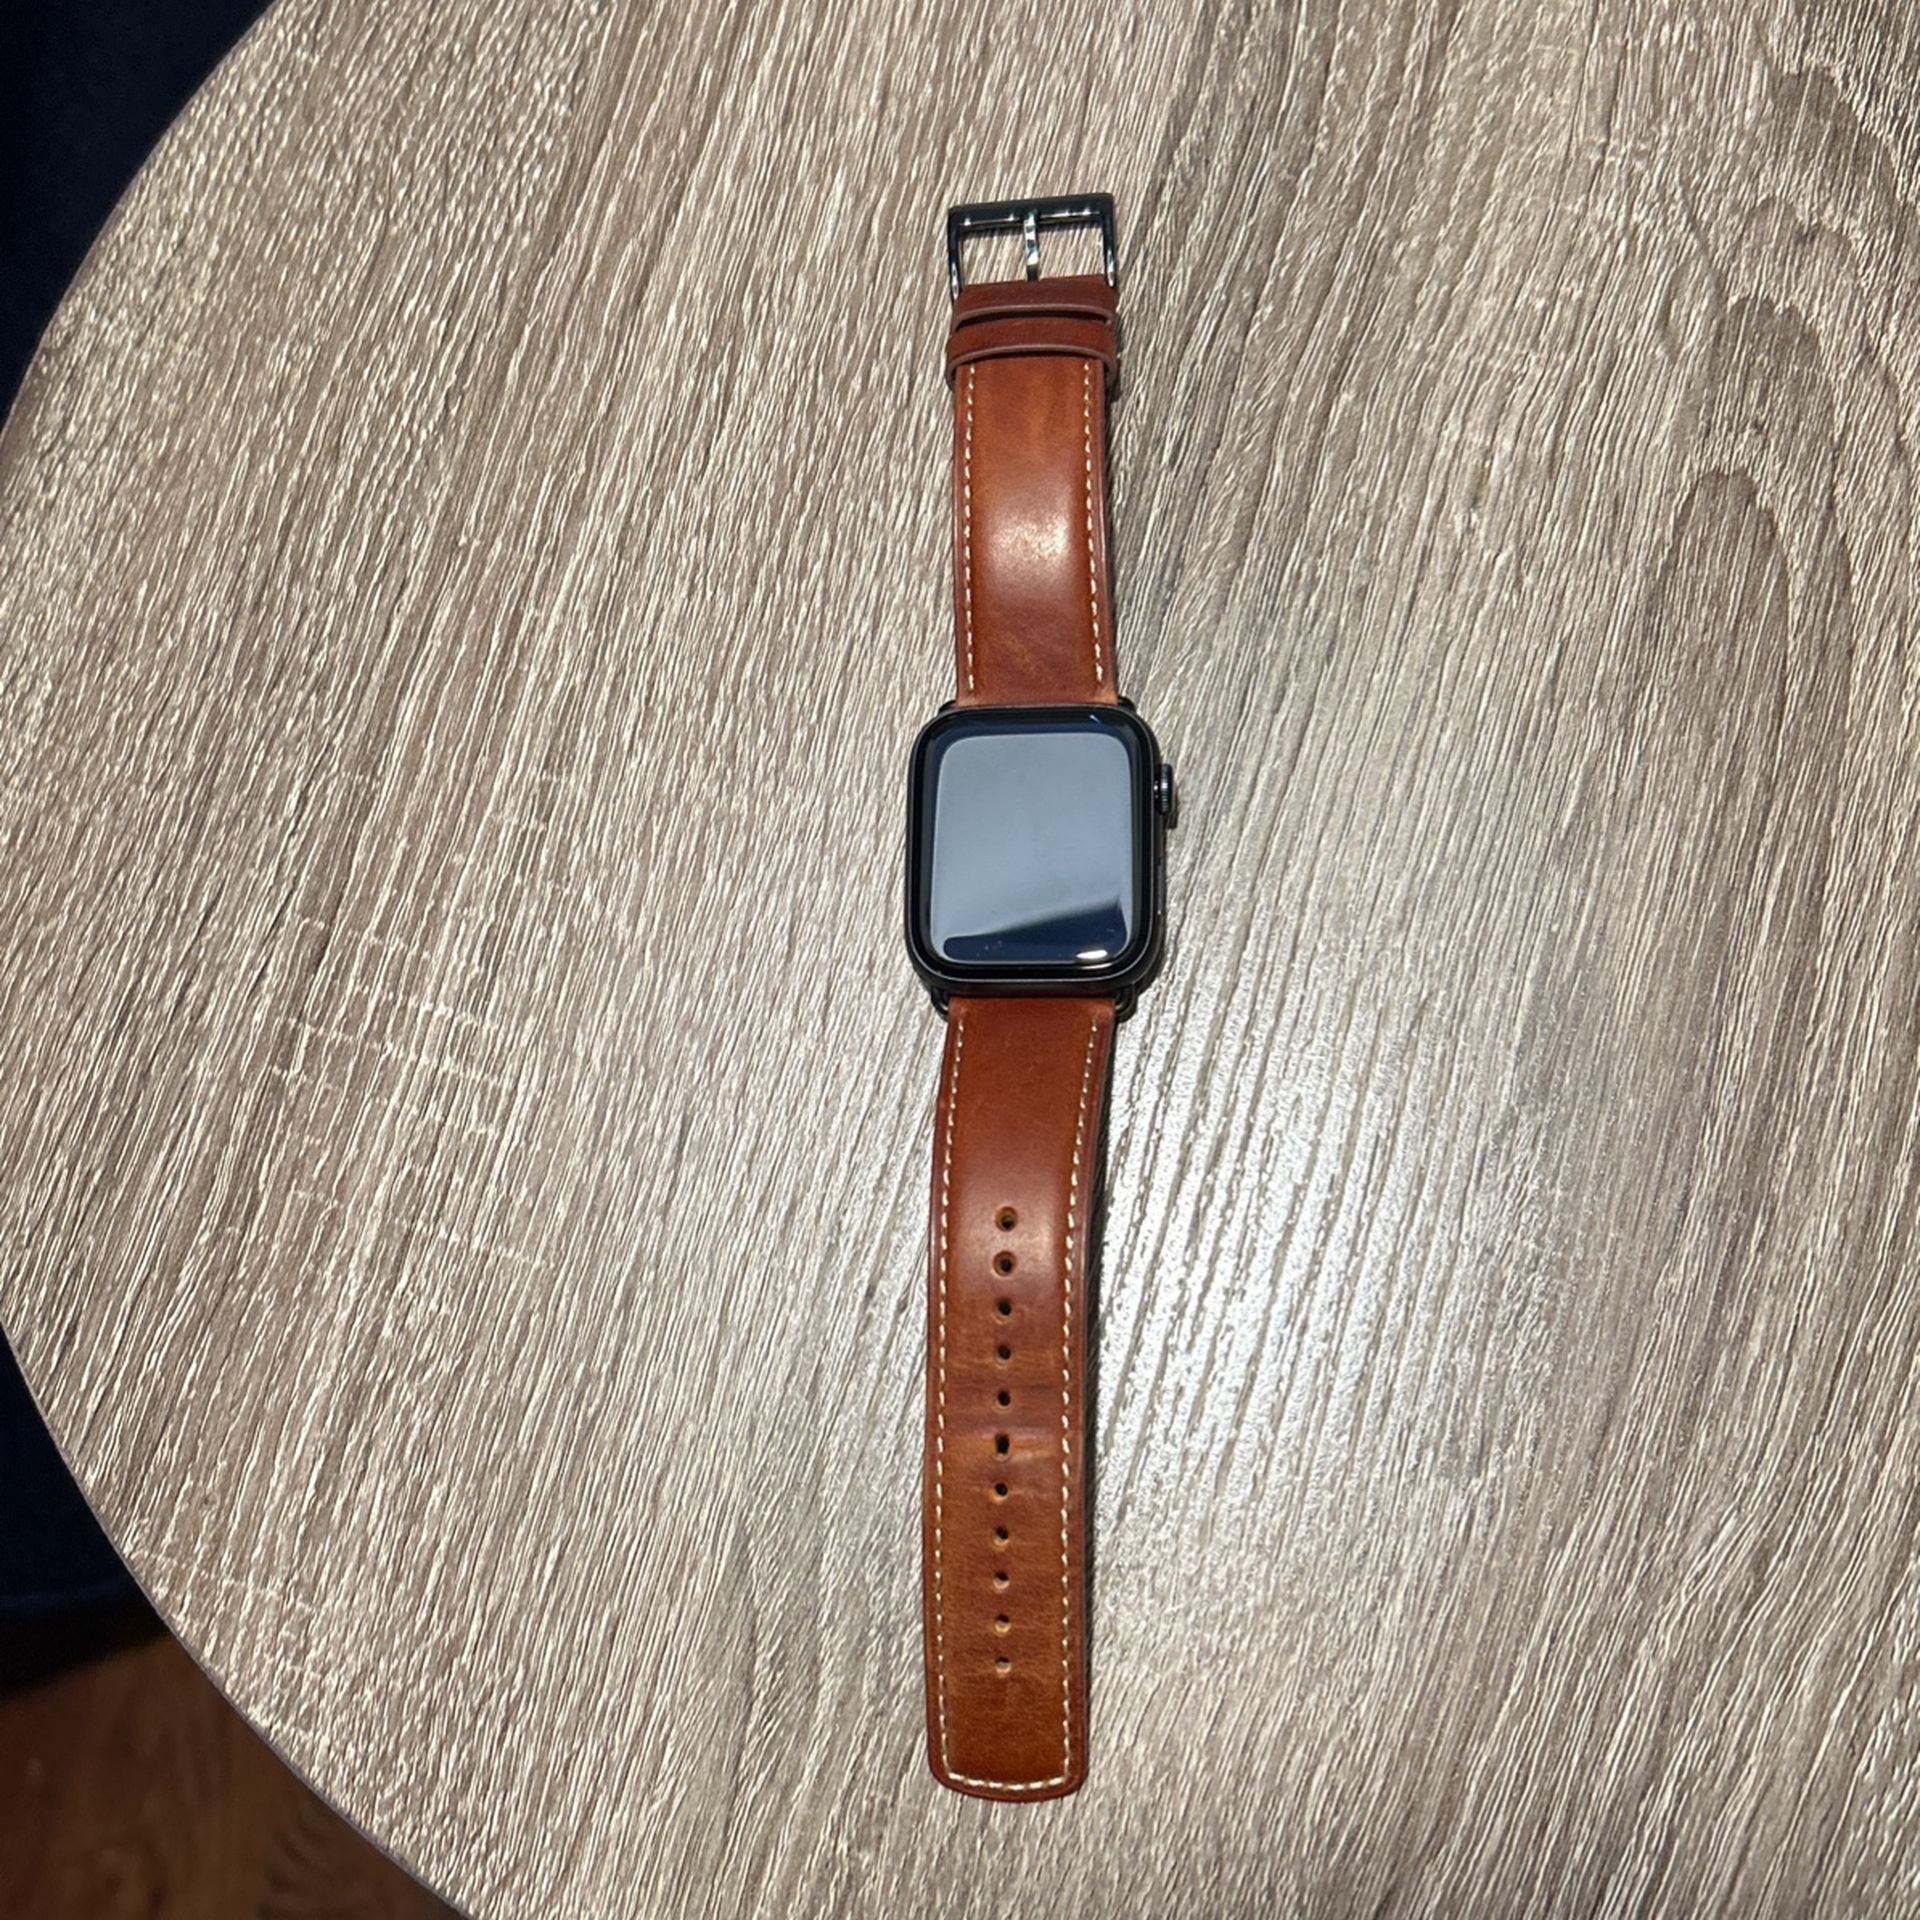 Apple Watch SE w/ Leather Band